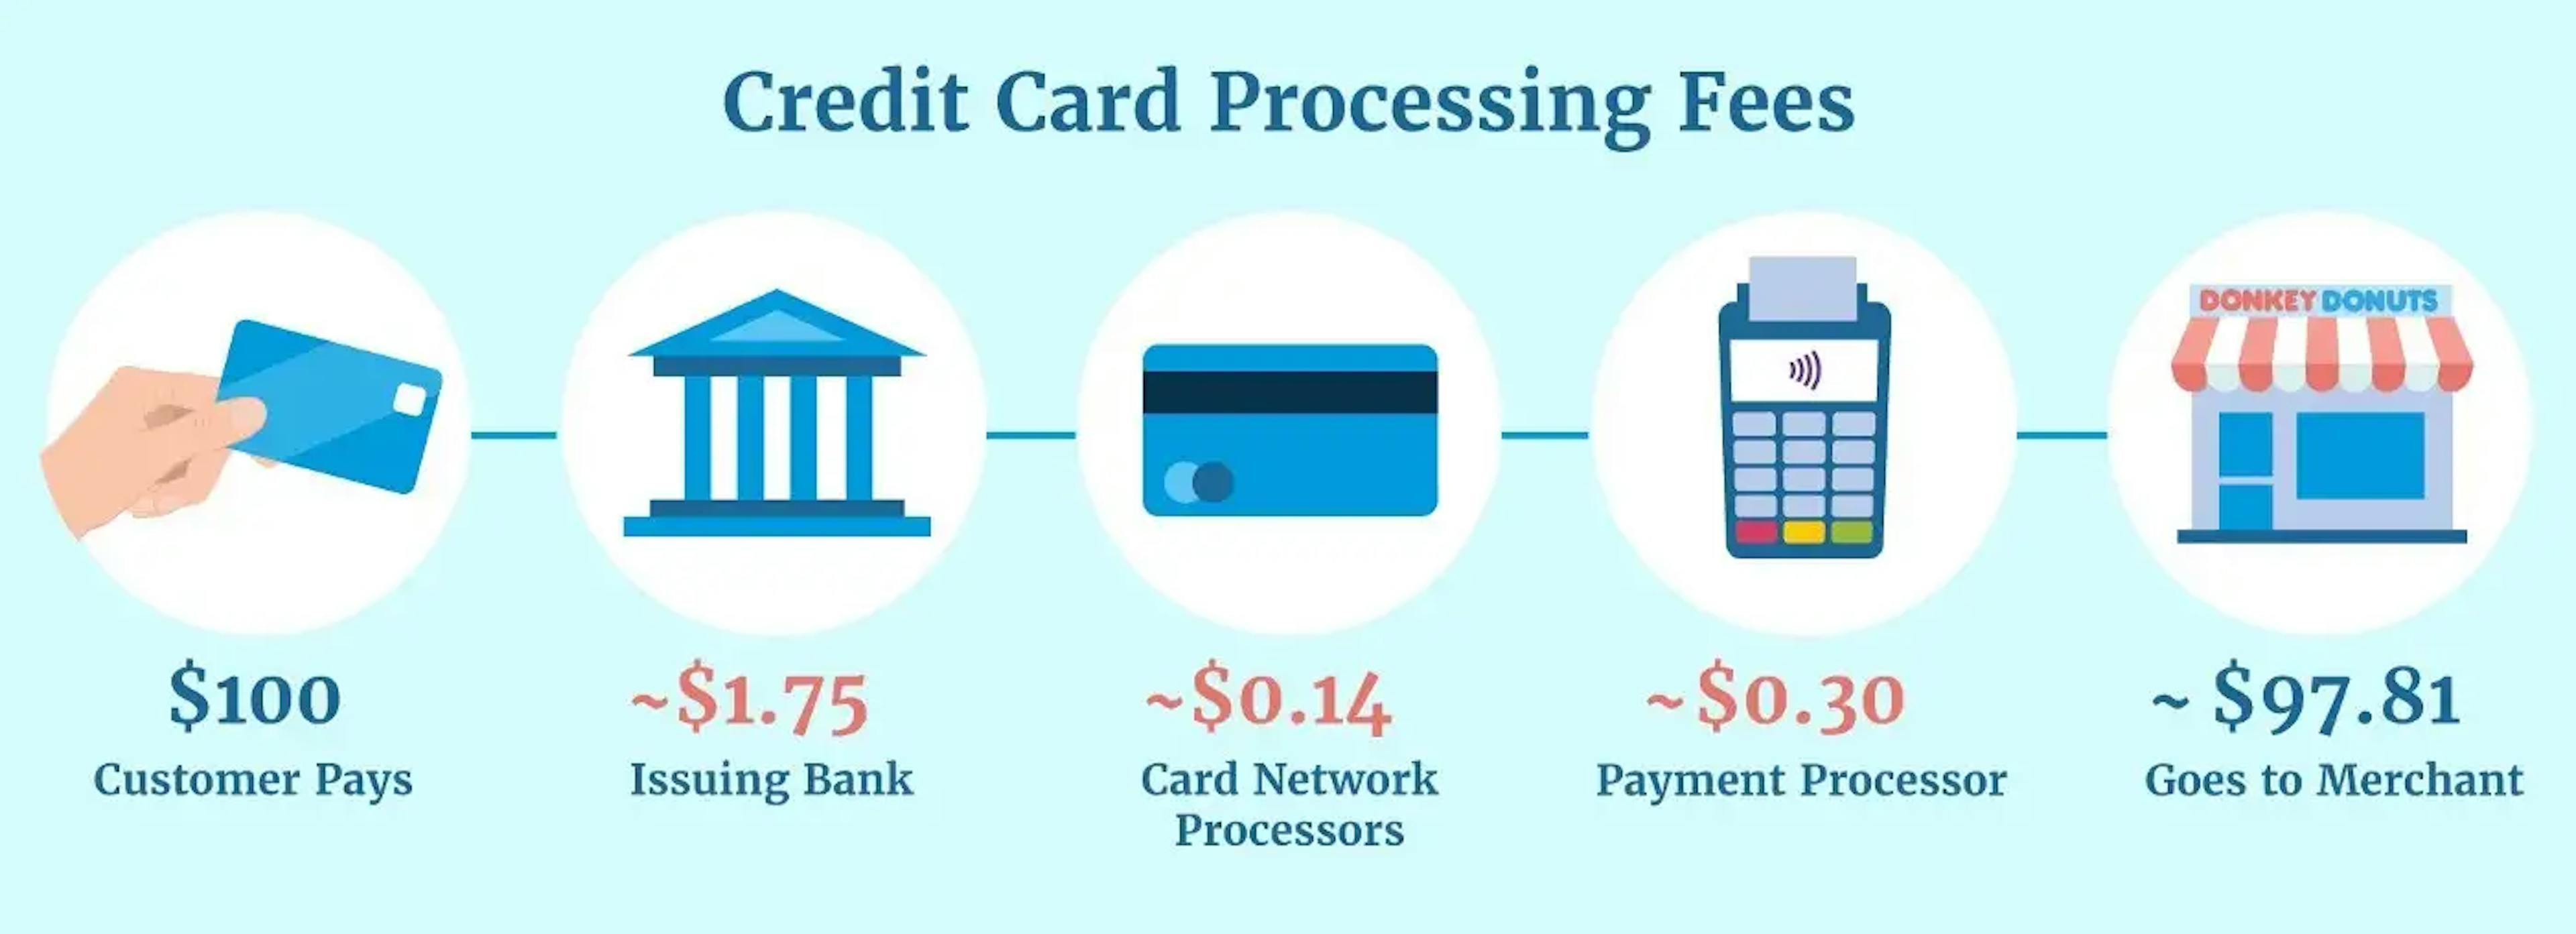 Credit Card Processing Fees (Source: Credit Donkey)